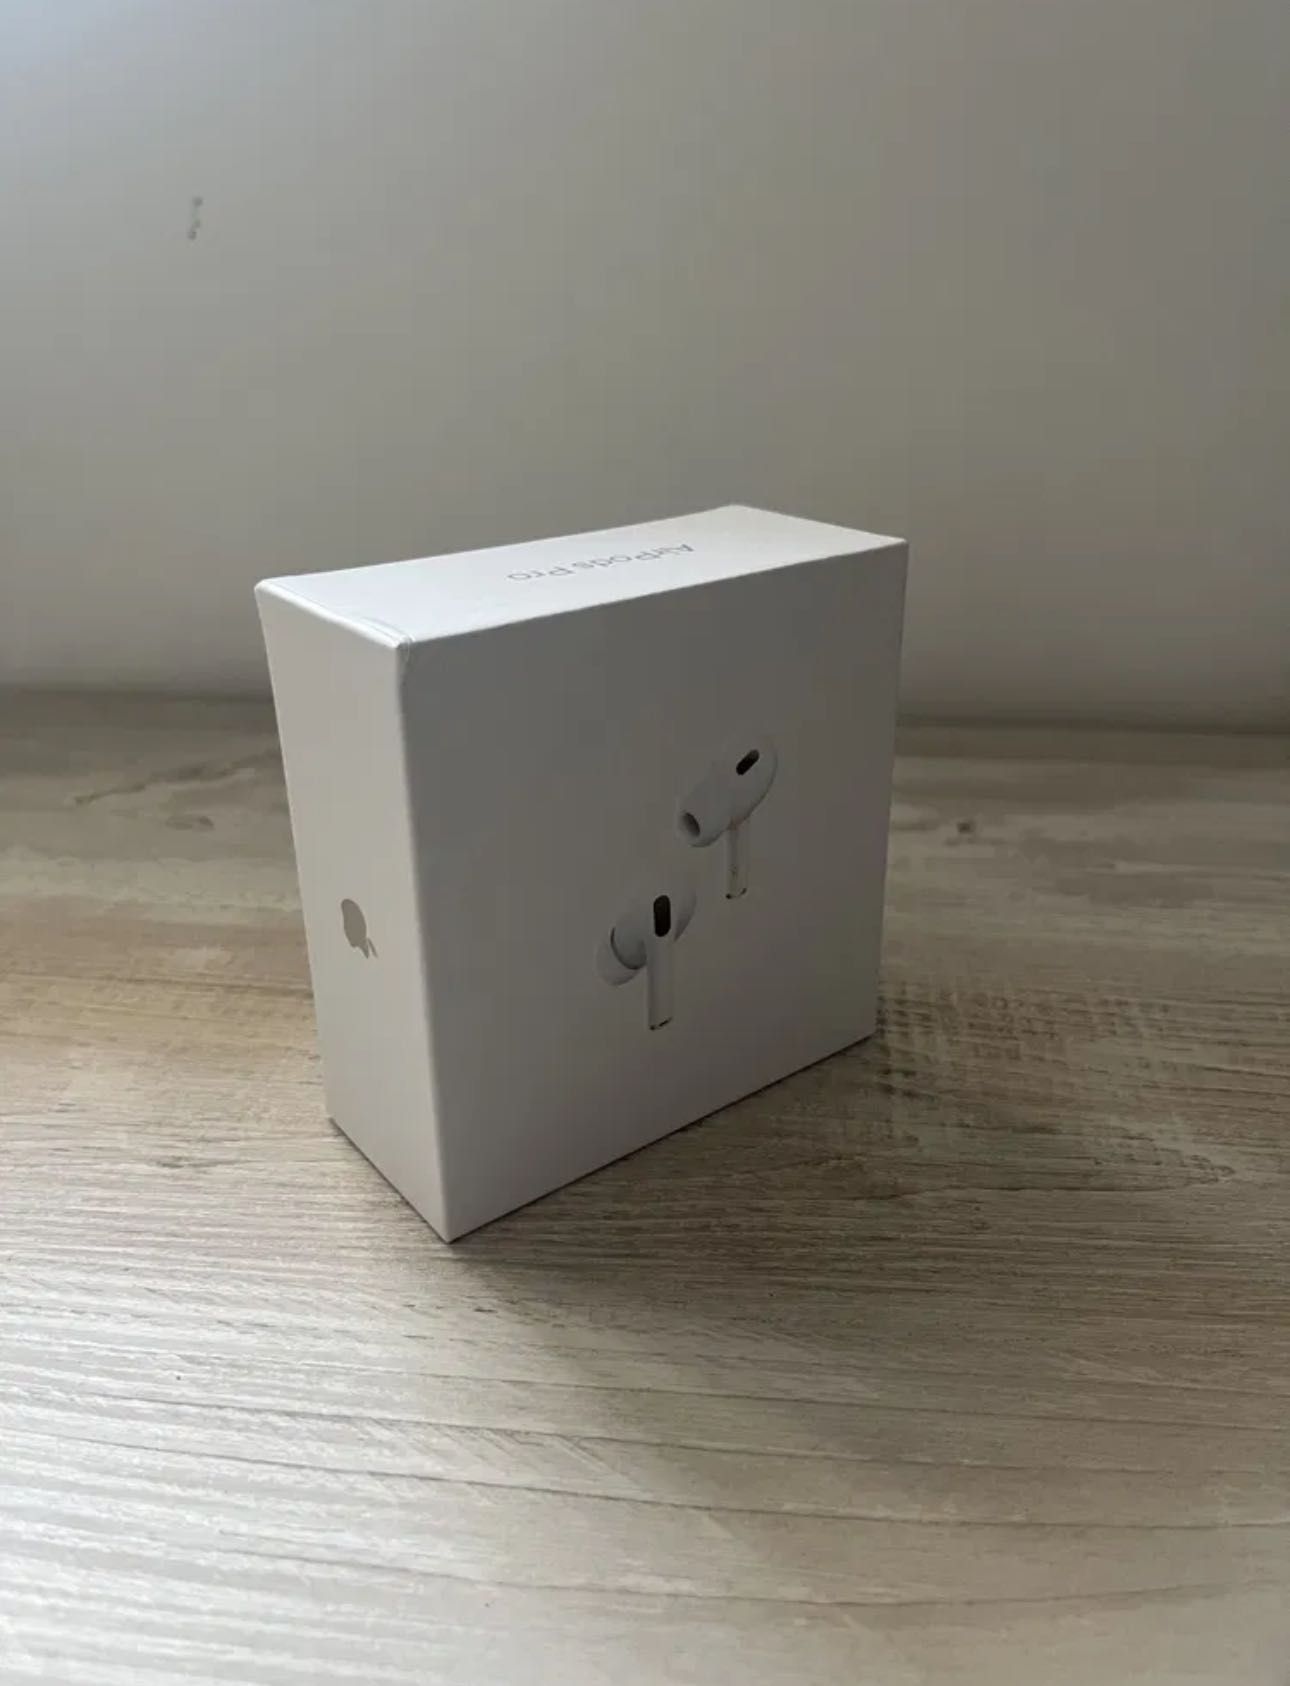 AirPods Pro 2gn .